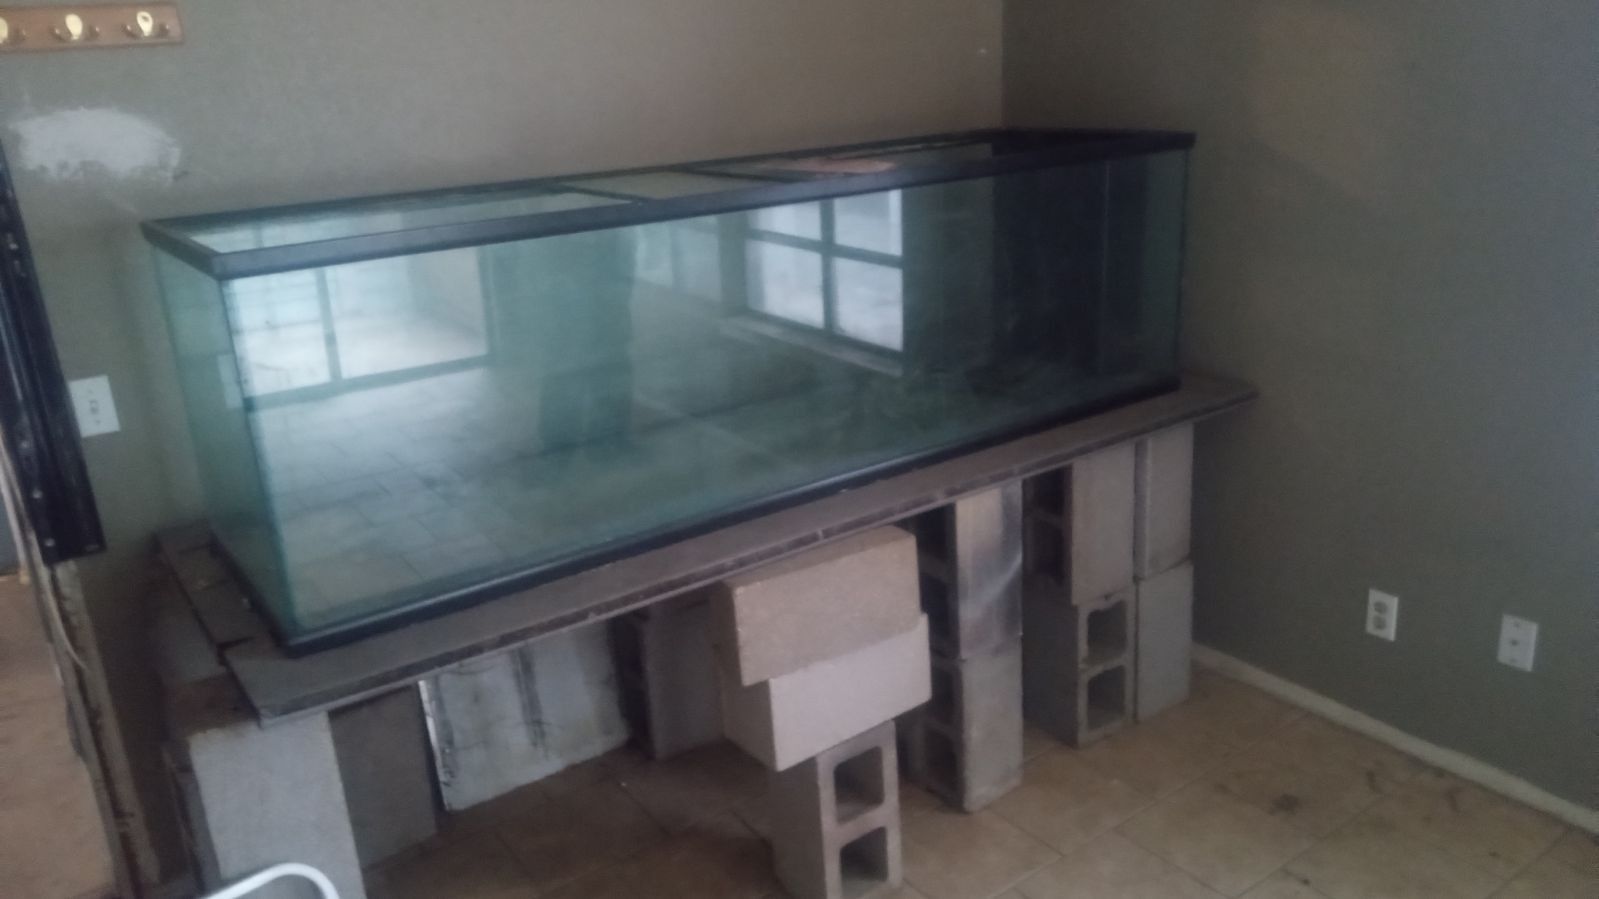 7 Ft Tank For Sale Best Offer Must Be Serious,And Pick It Up.. So Bring Help